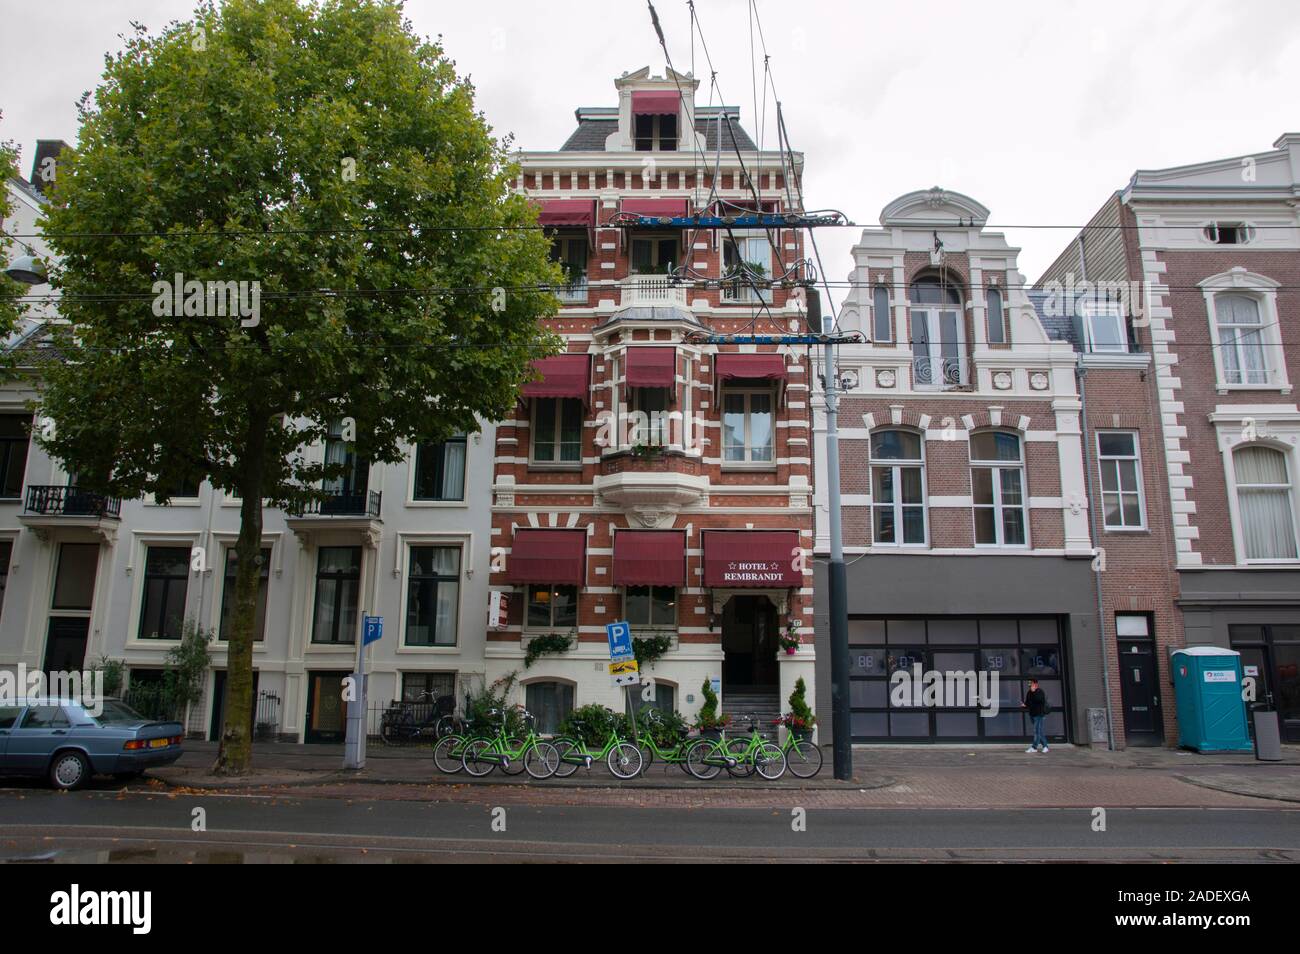 Hotel Rembrandt At Amsterdam The Netherlands 2019 Stock Photo